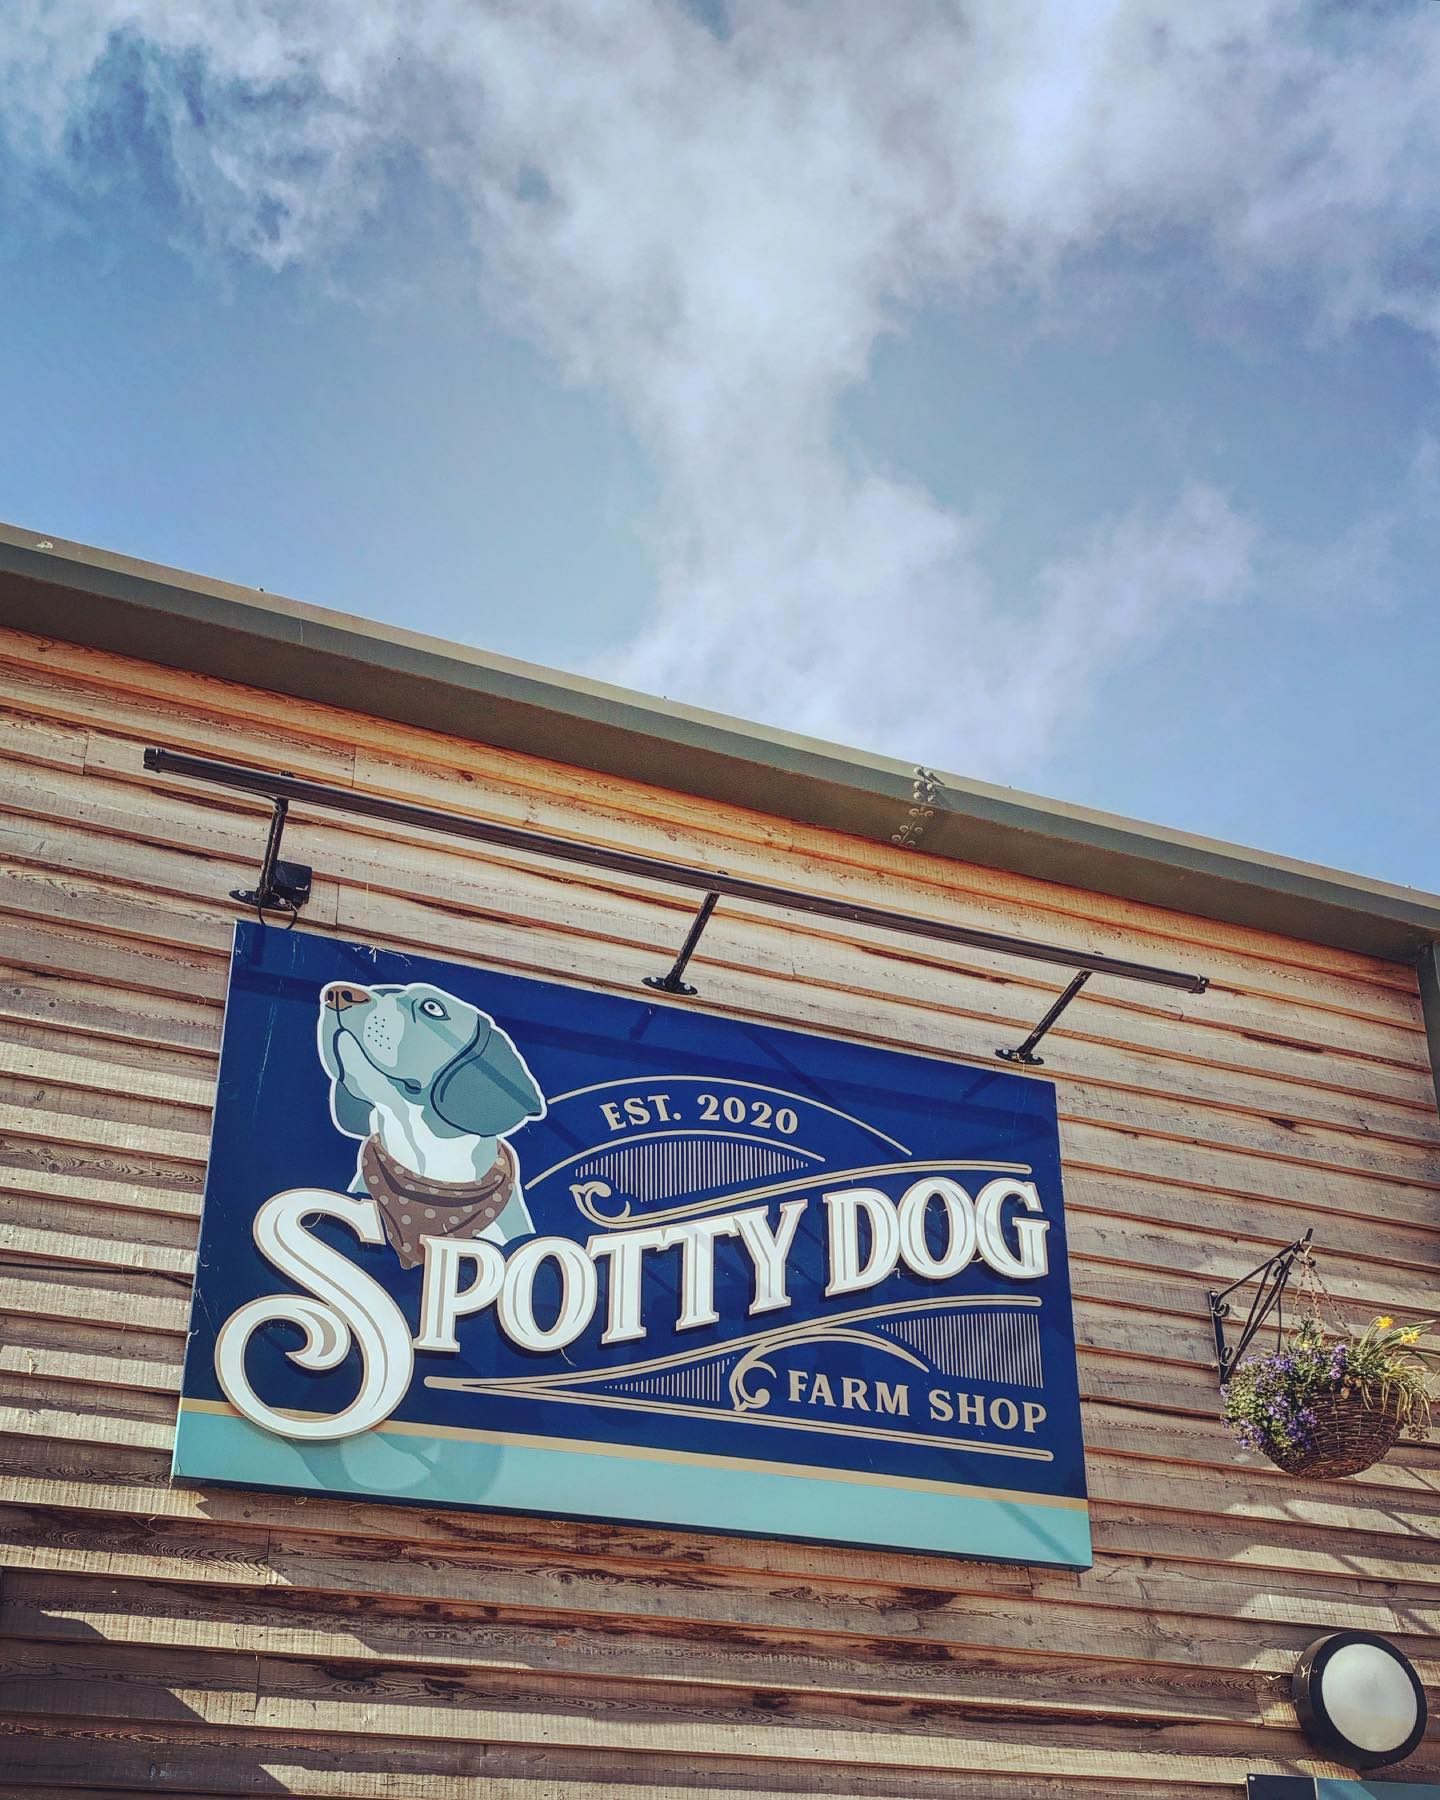 Lovely visit to @spottydogfarmshop today!So nice to see @jessgreyleather @cindy.patterson29 and @flippitystitch who are selling their wares in the fab chalets outside today ?